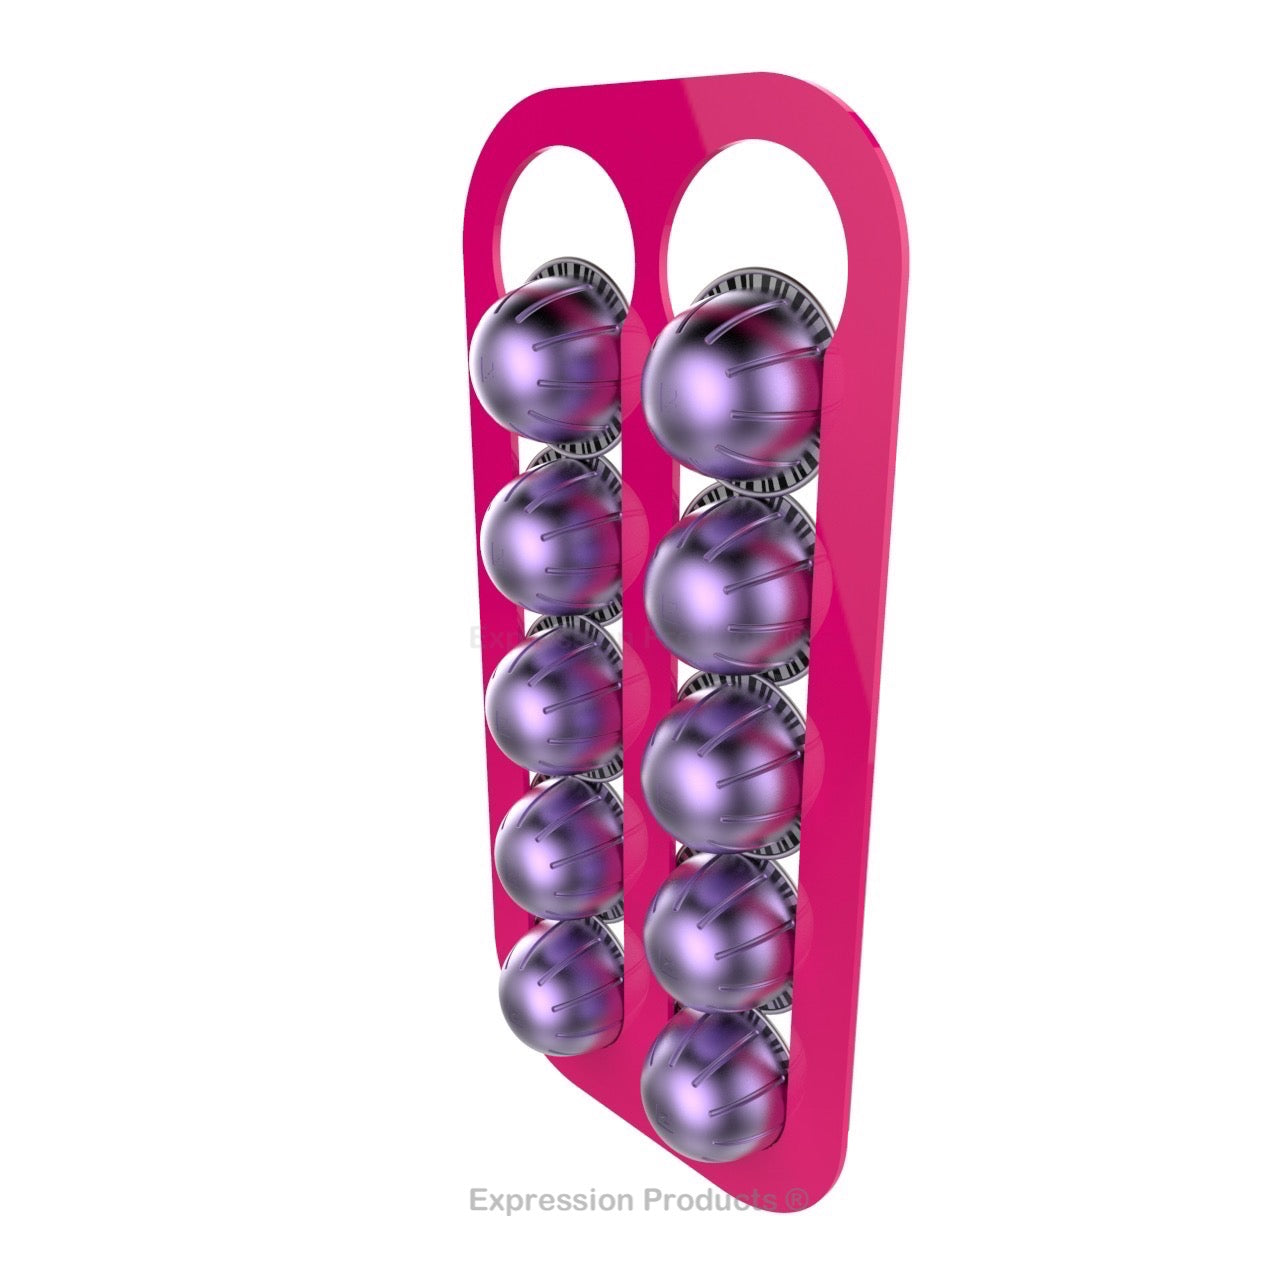 Magnetic Nespresso Vertuo capsule holder shown in pink holding 10 pods